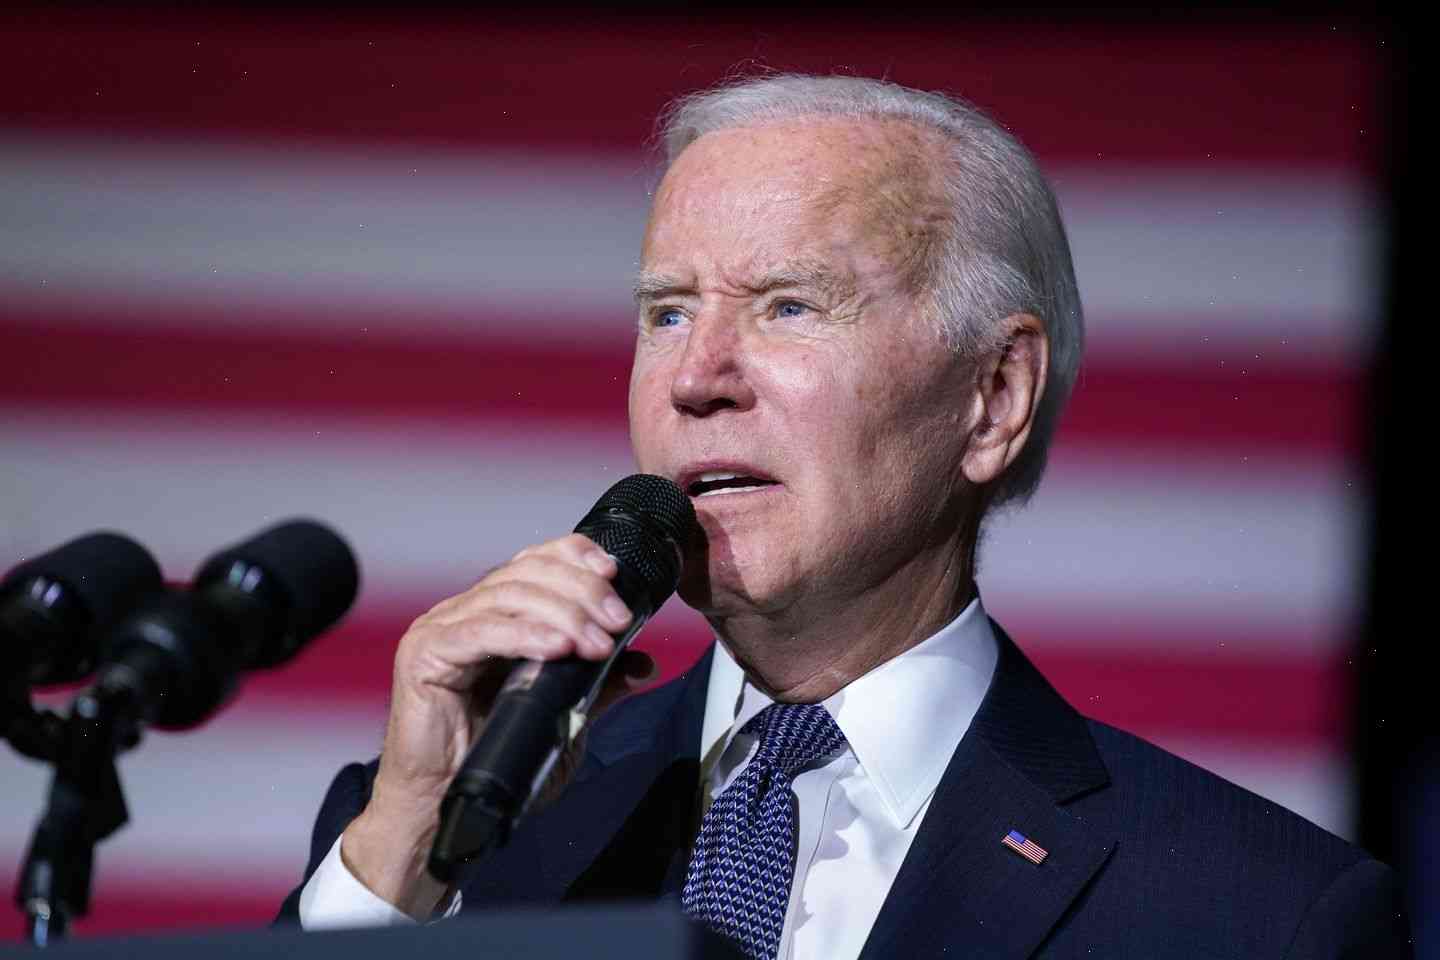 Students and alumni take to social media with attack on Biden over his college loan forgiveness plan